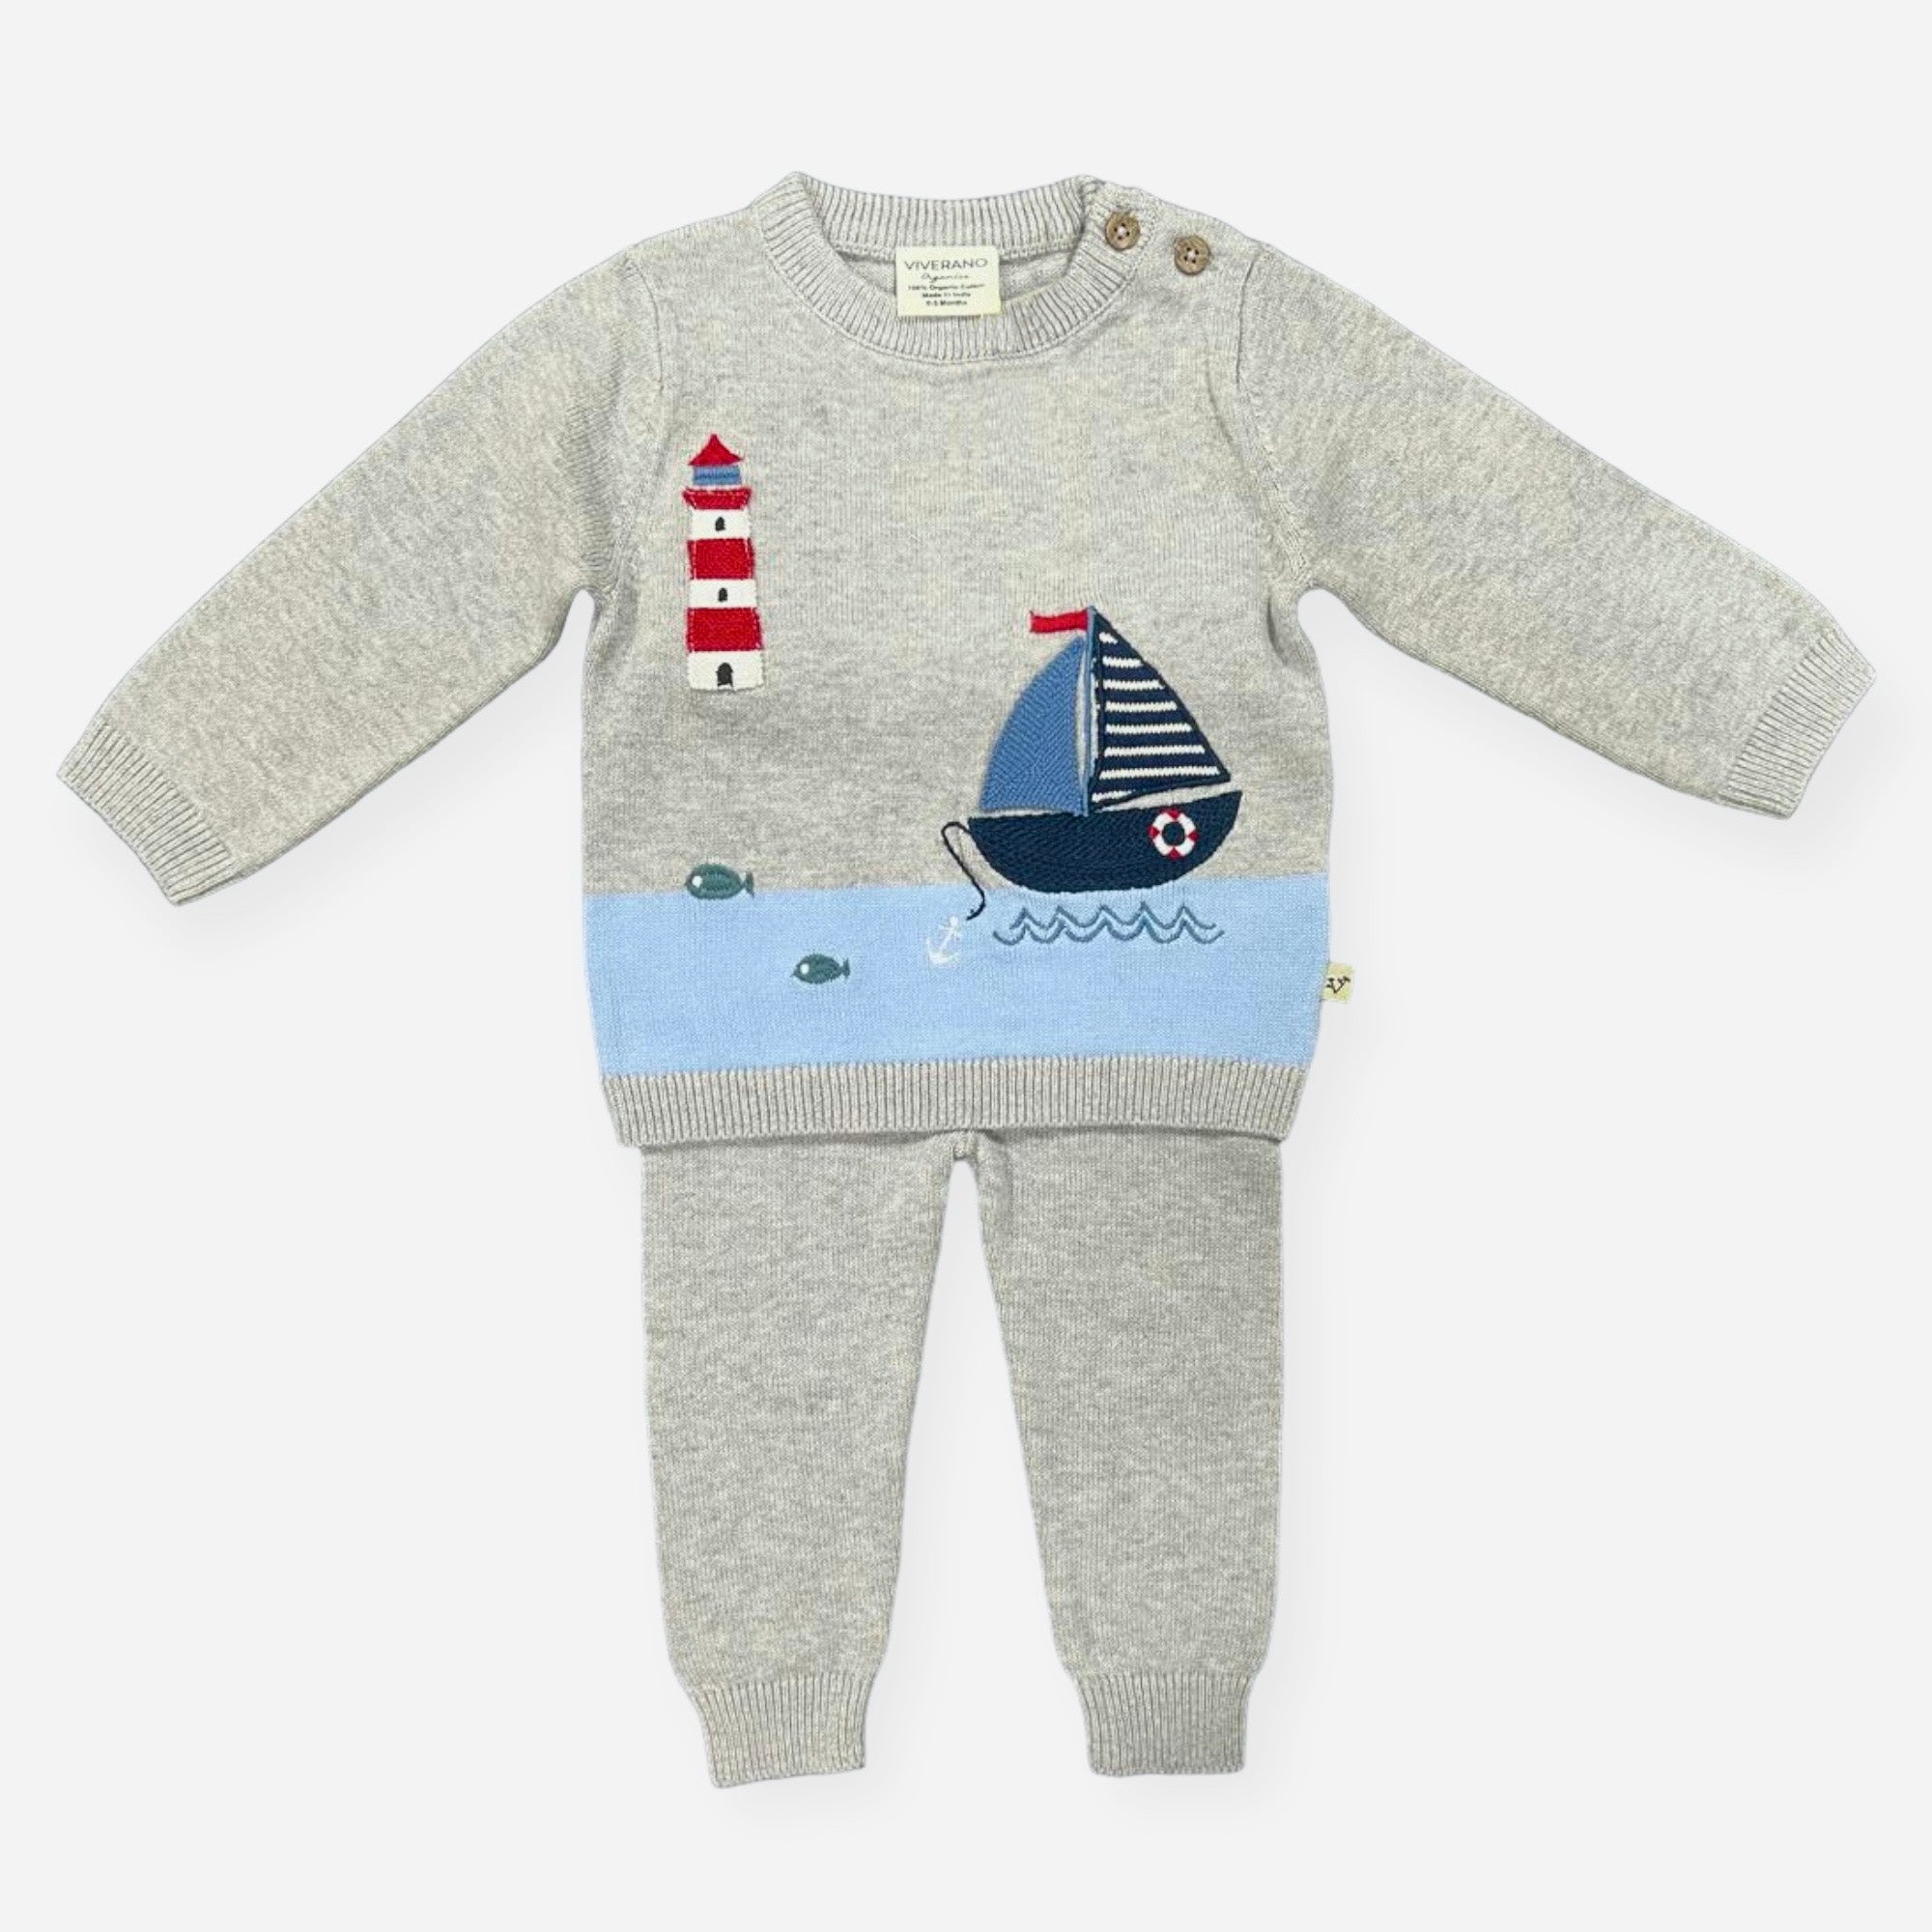 Lighthouse & Boat Embroidered Baby Knit Pullover and Pants SET (Organic Cotton)